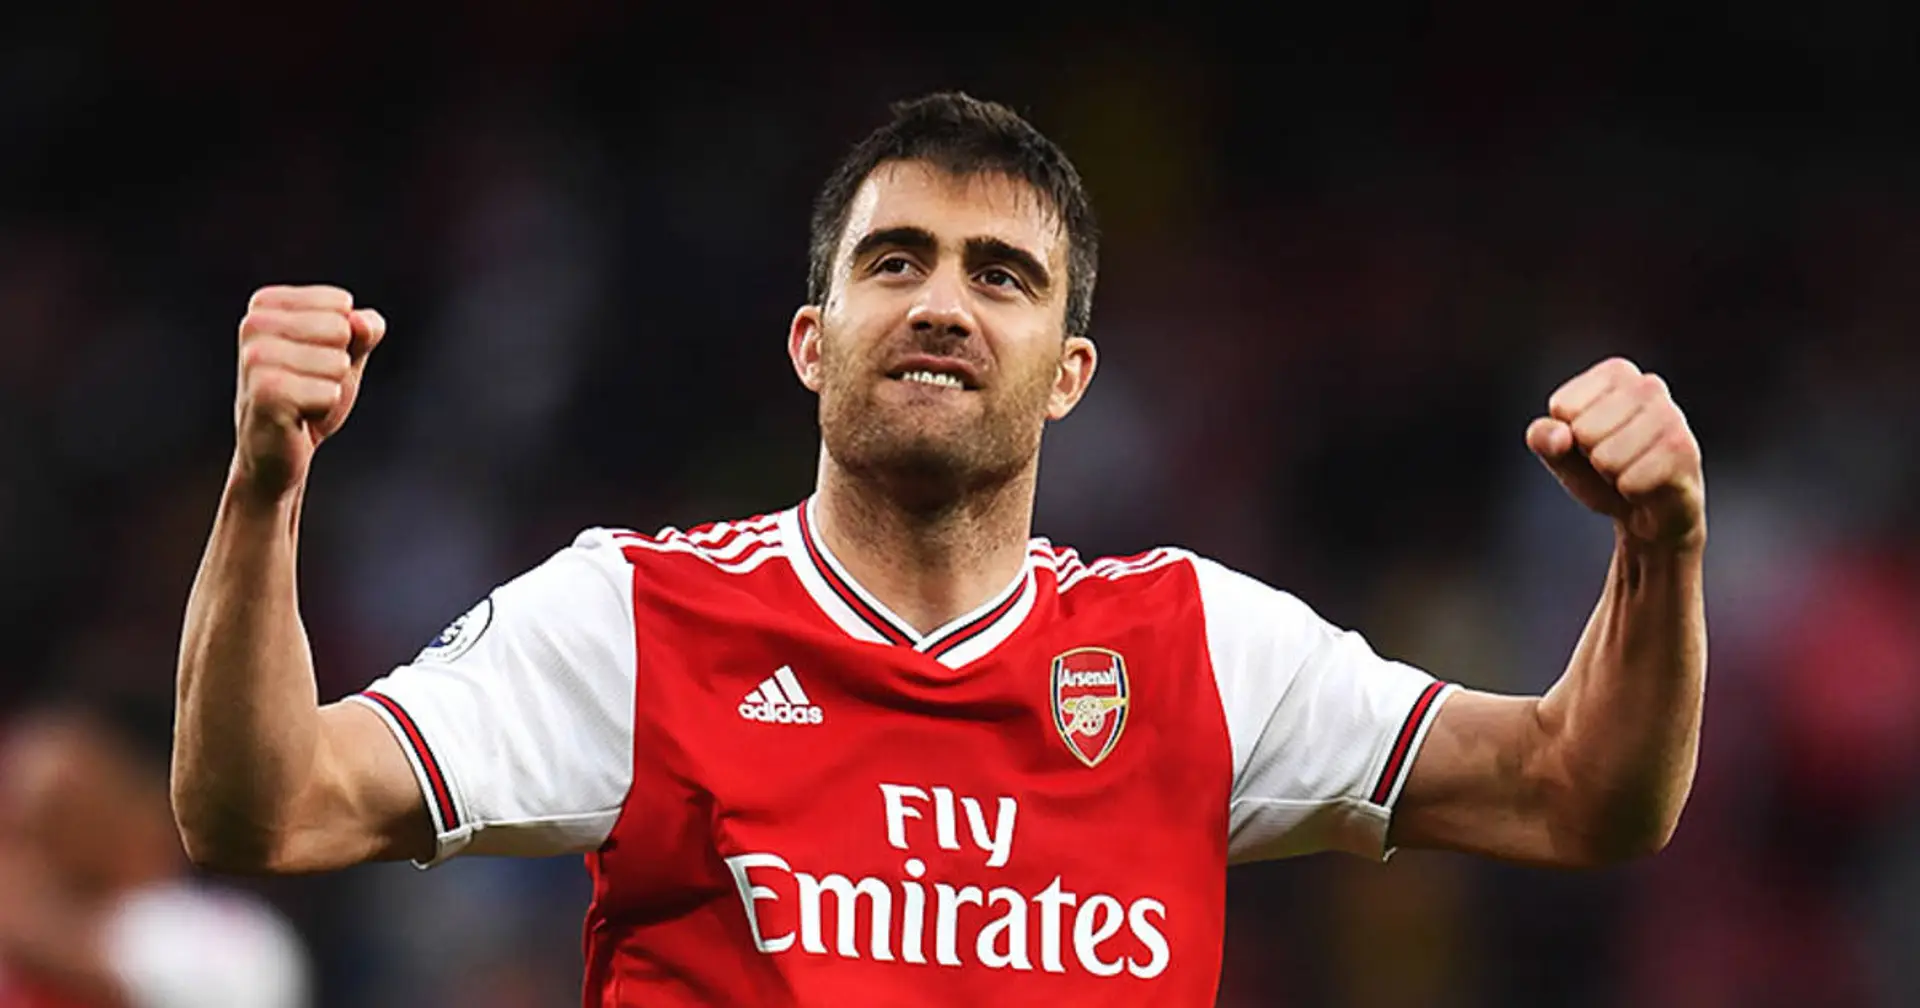 'His desire and commitment were next to none'; 'I'm gonna miss his fist pumps after stopping an attack': Fans react to Sokratis departure